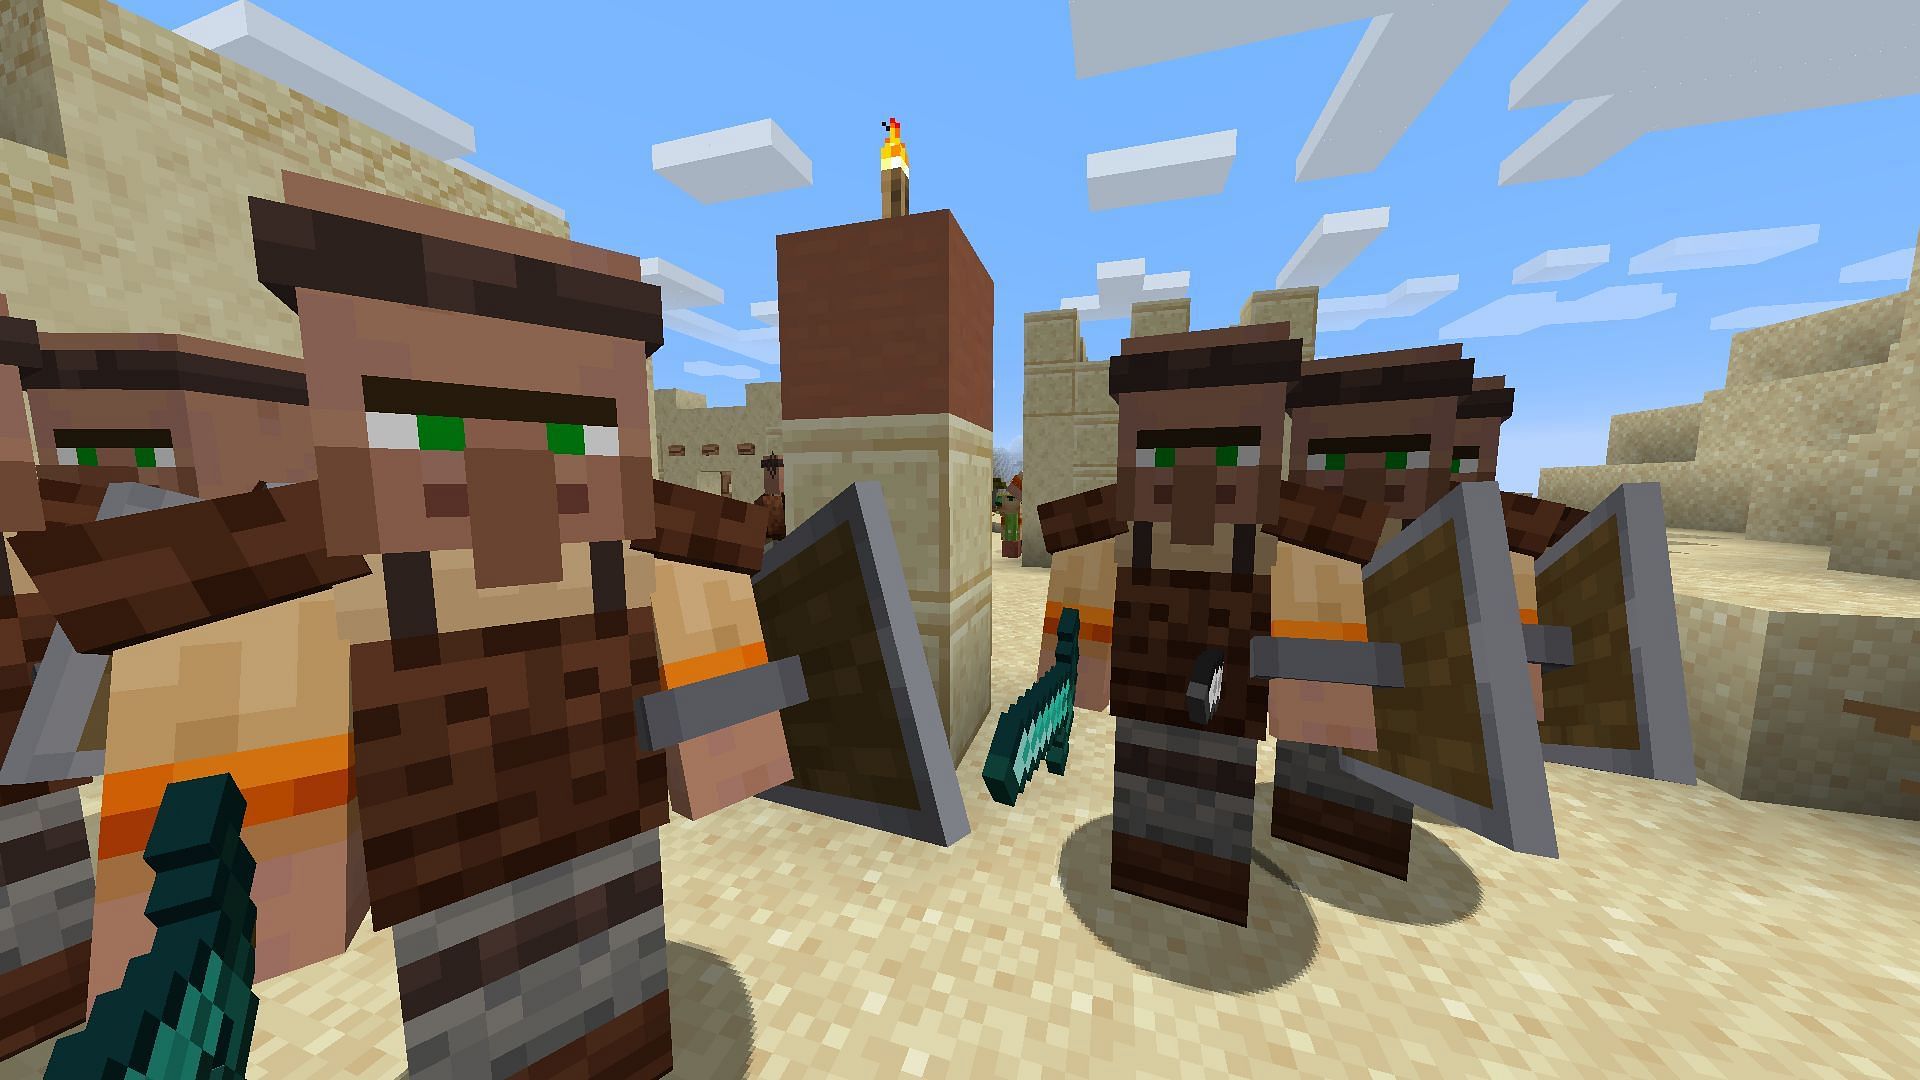 Desert guards ready for battle in the Guard Villagers mod for Minecraft (Image via almightytallestred/CurseForge)